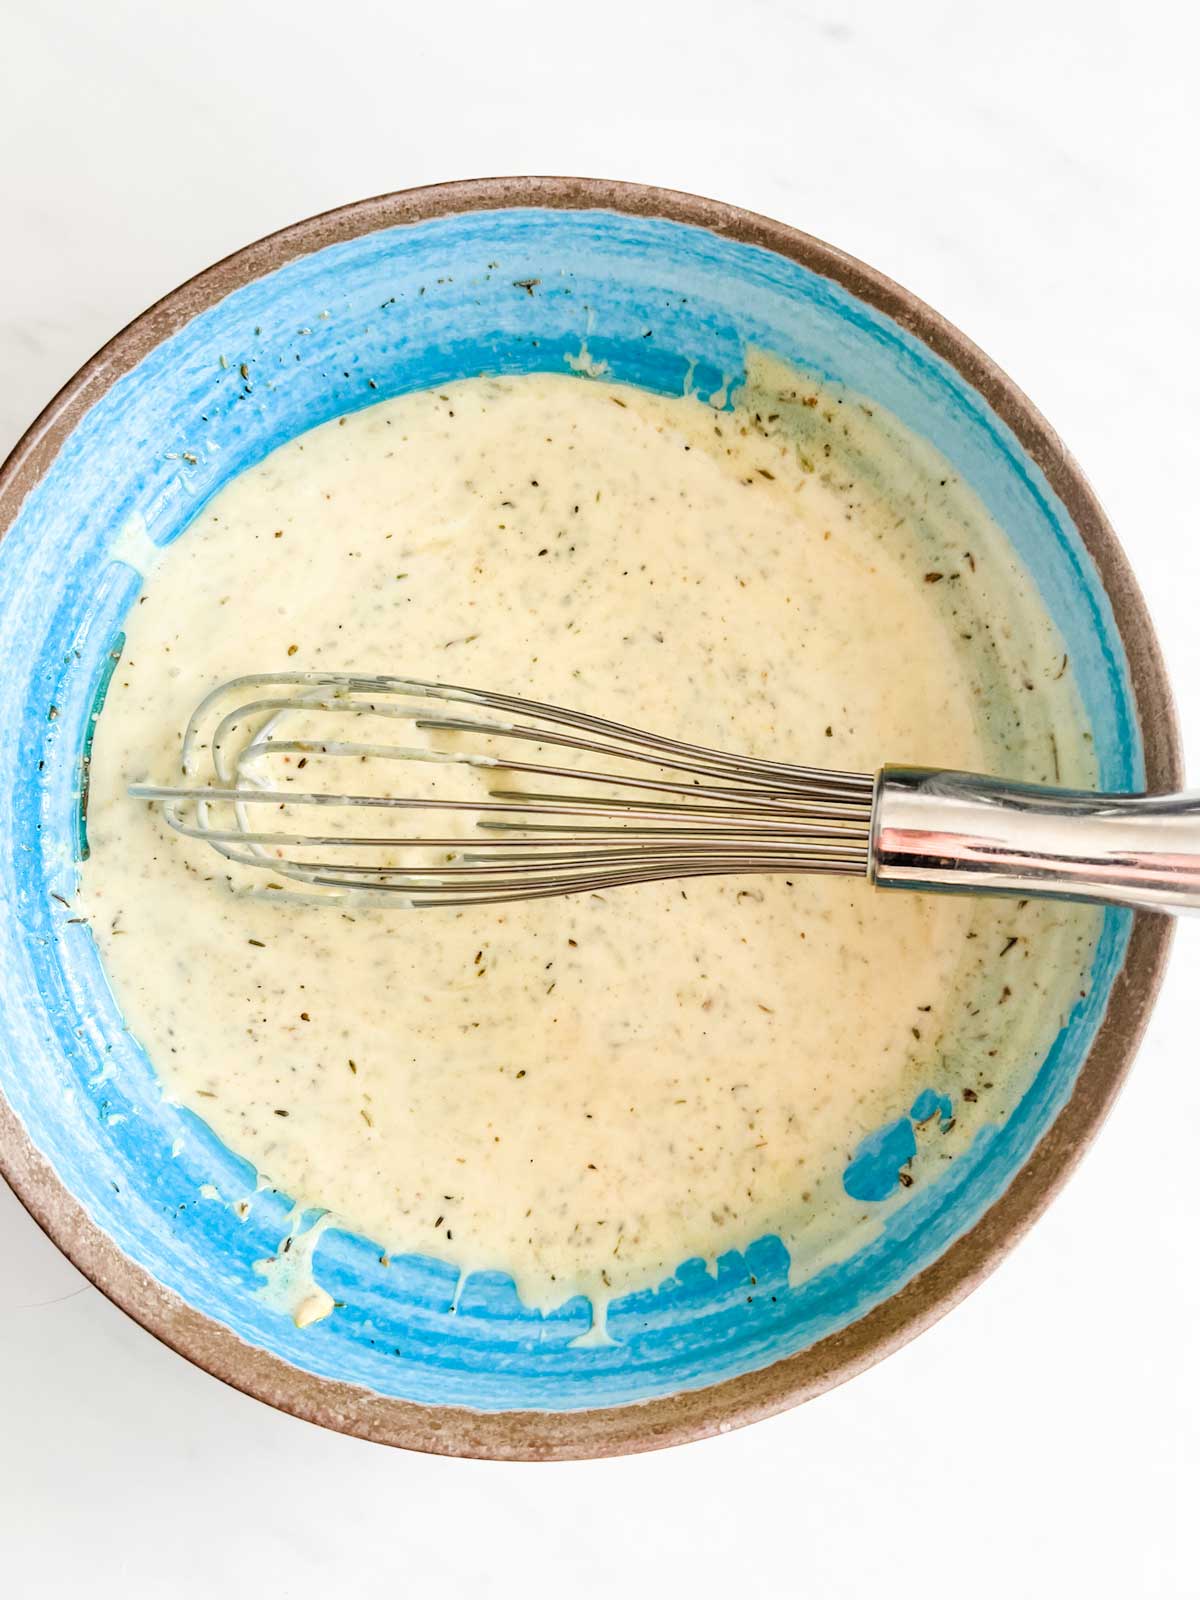 Chicken marinade being whisked together in a blue bowl.